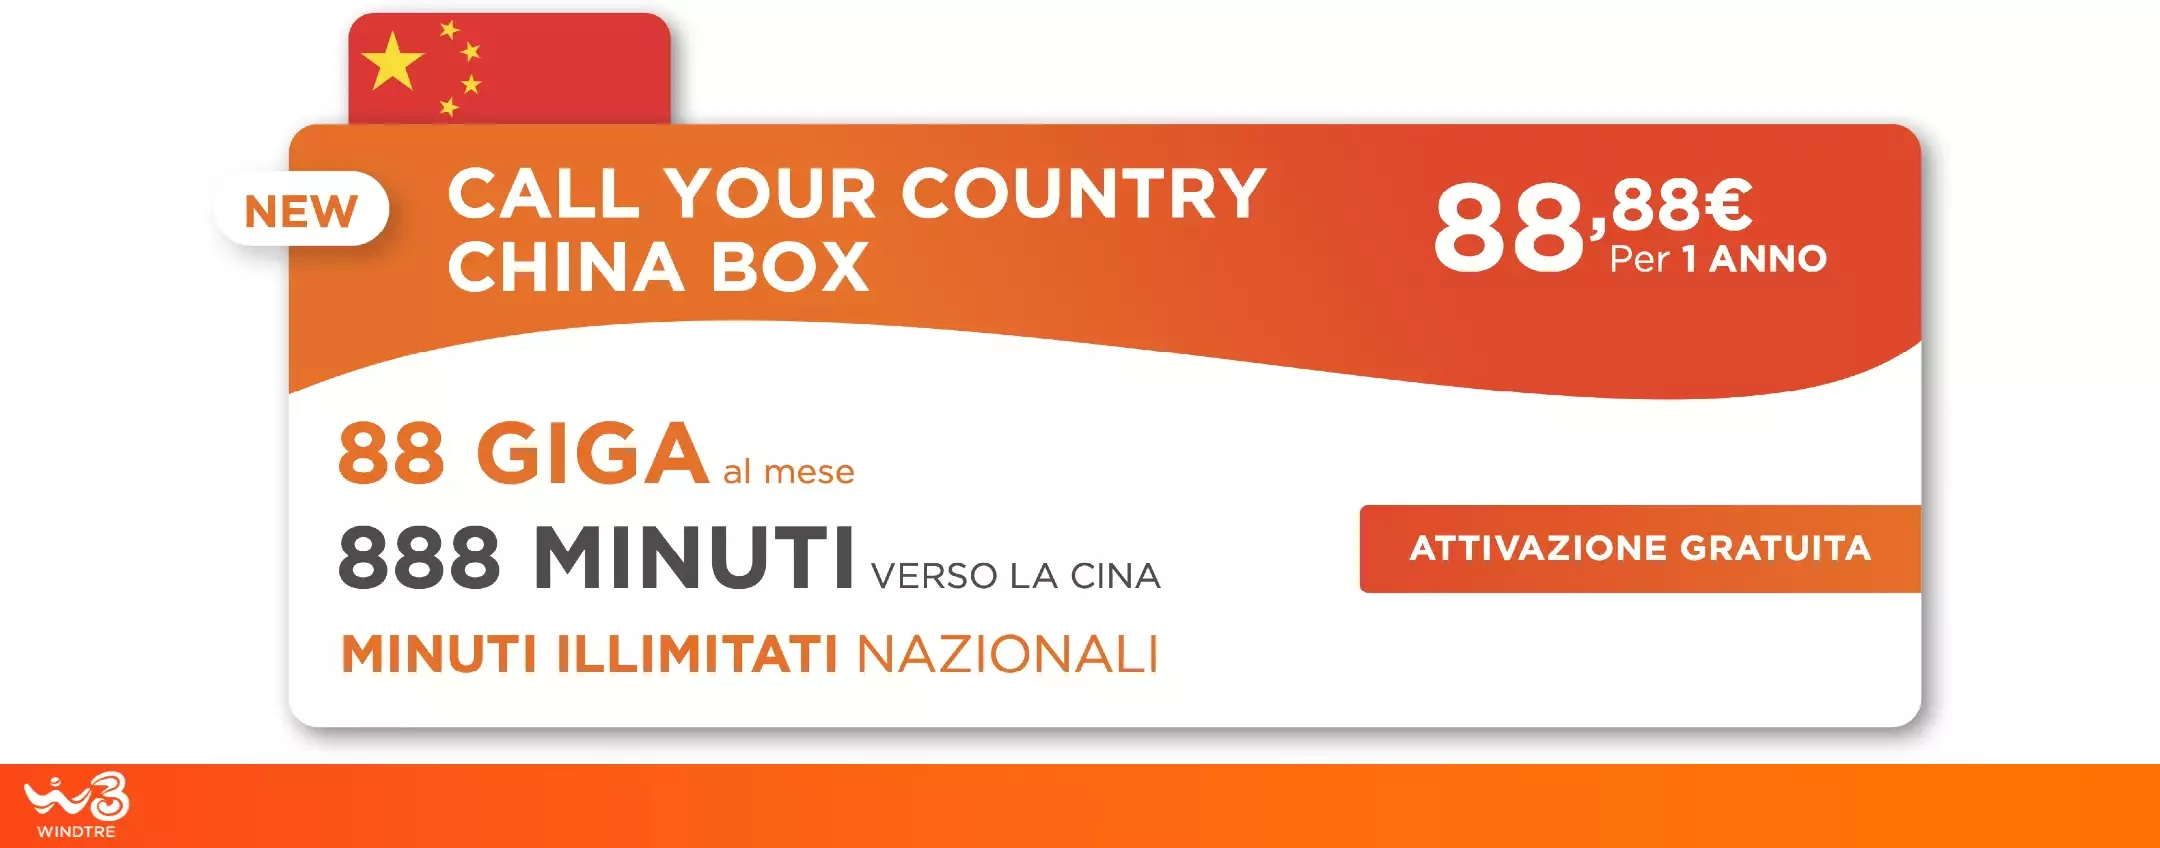 Call Your Country China Box: PROMO BOMBA W3